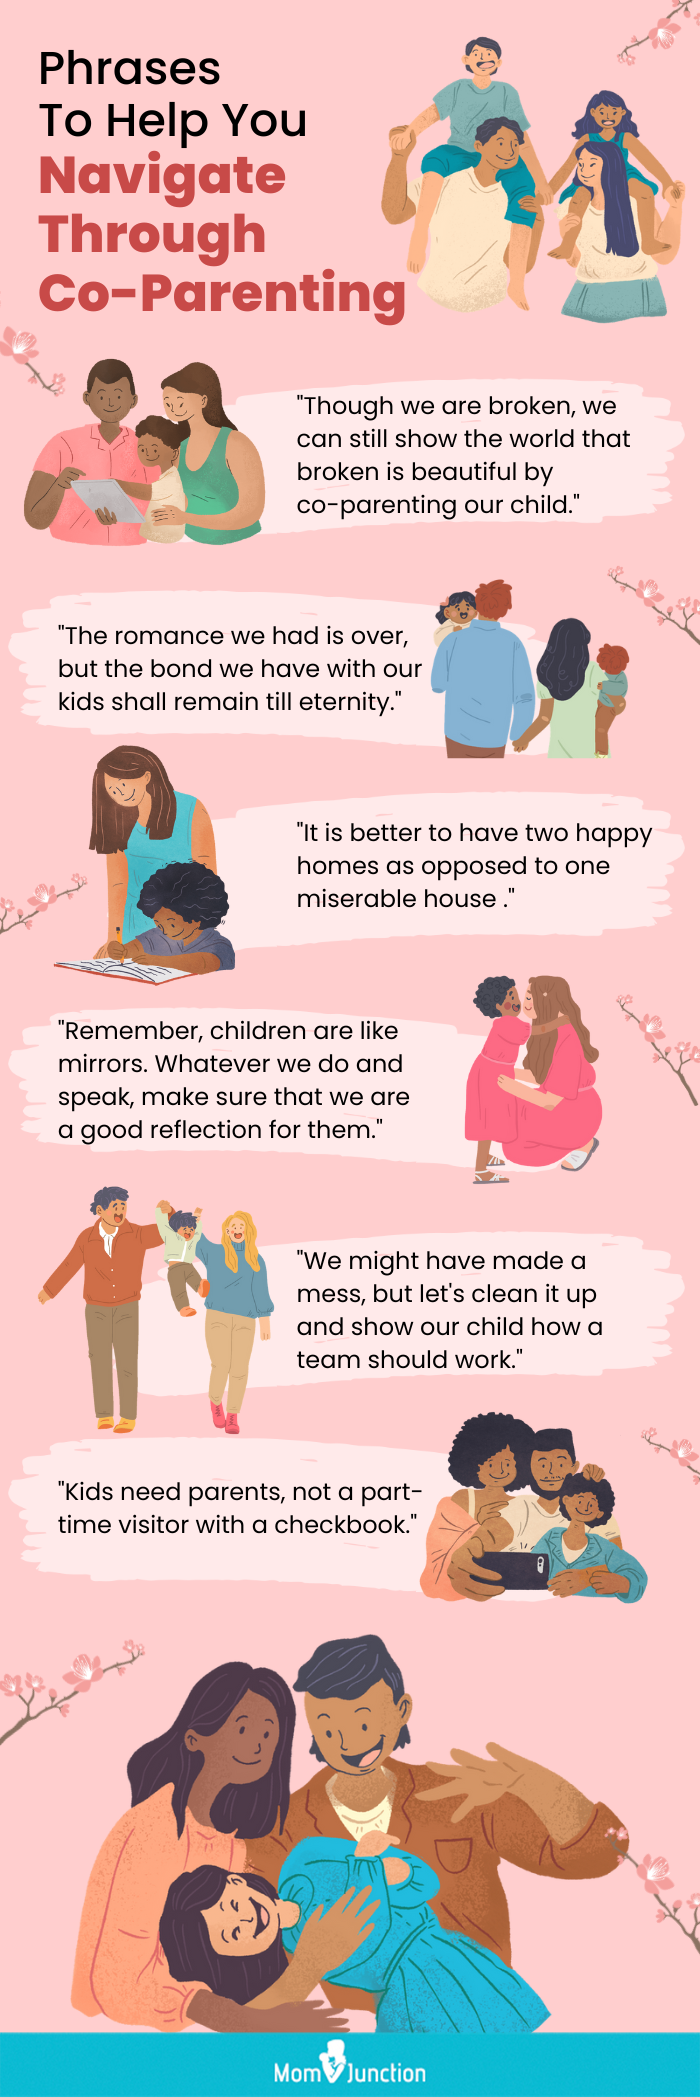 phrases to help you navigate through co-parenting (infographic)